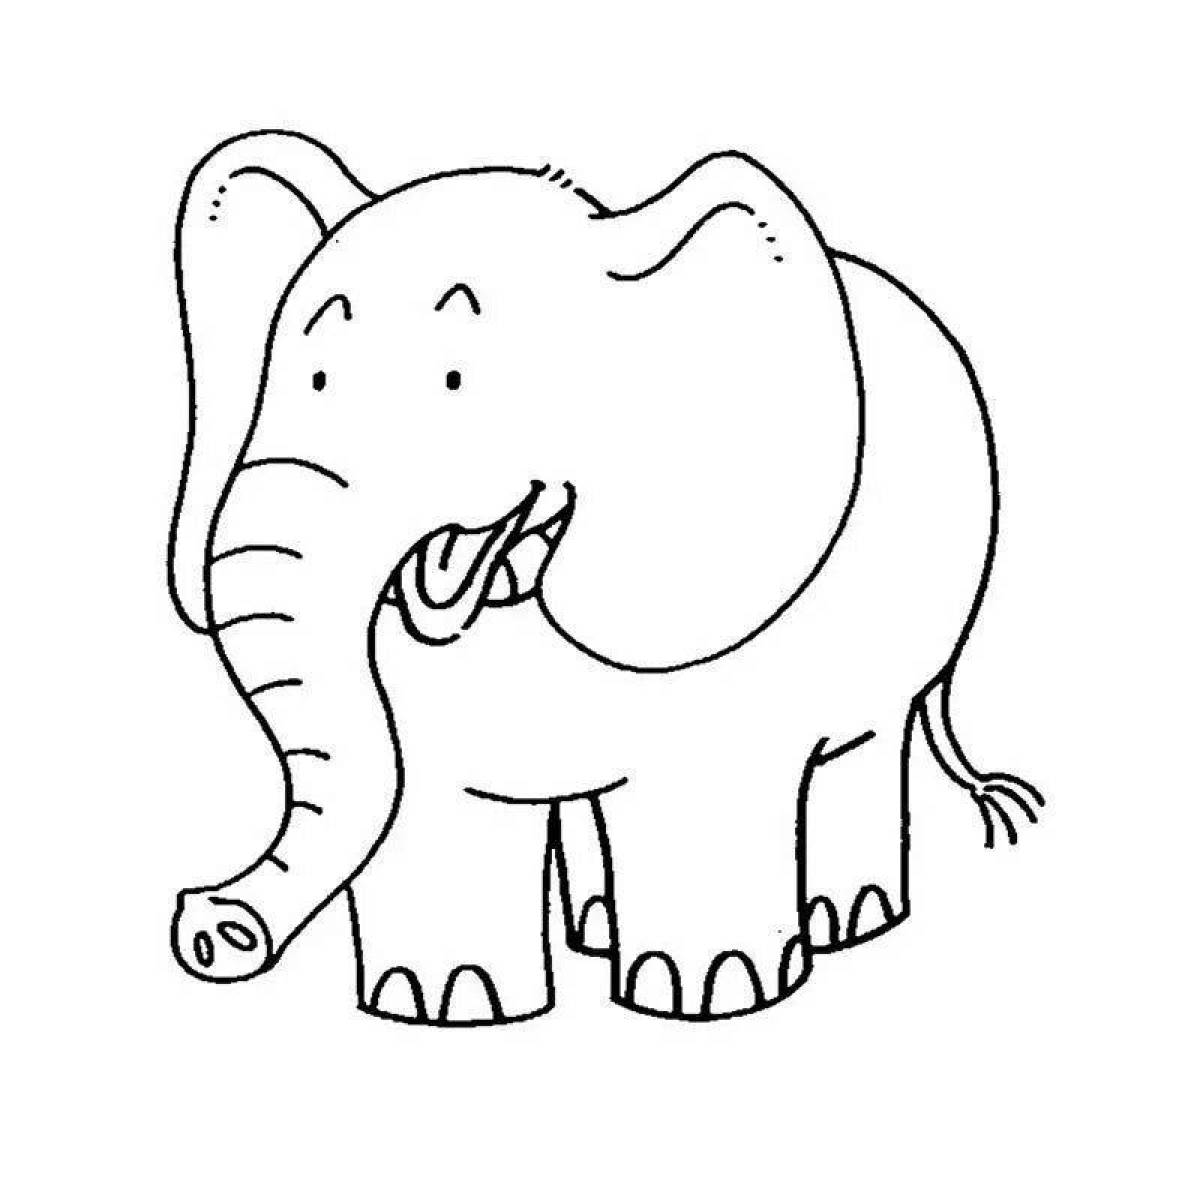 Amazing elephant coloring book for 3-4 year olds